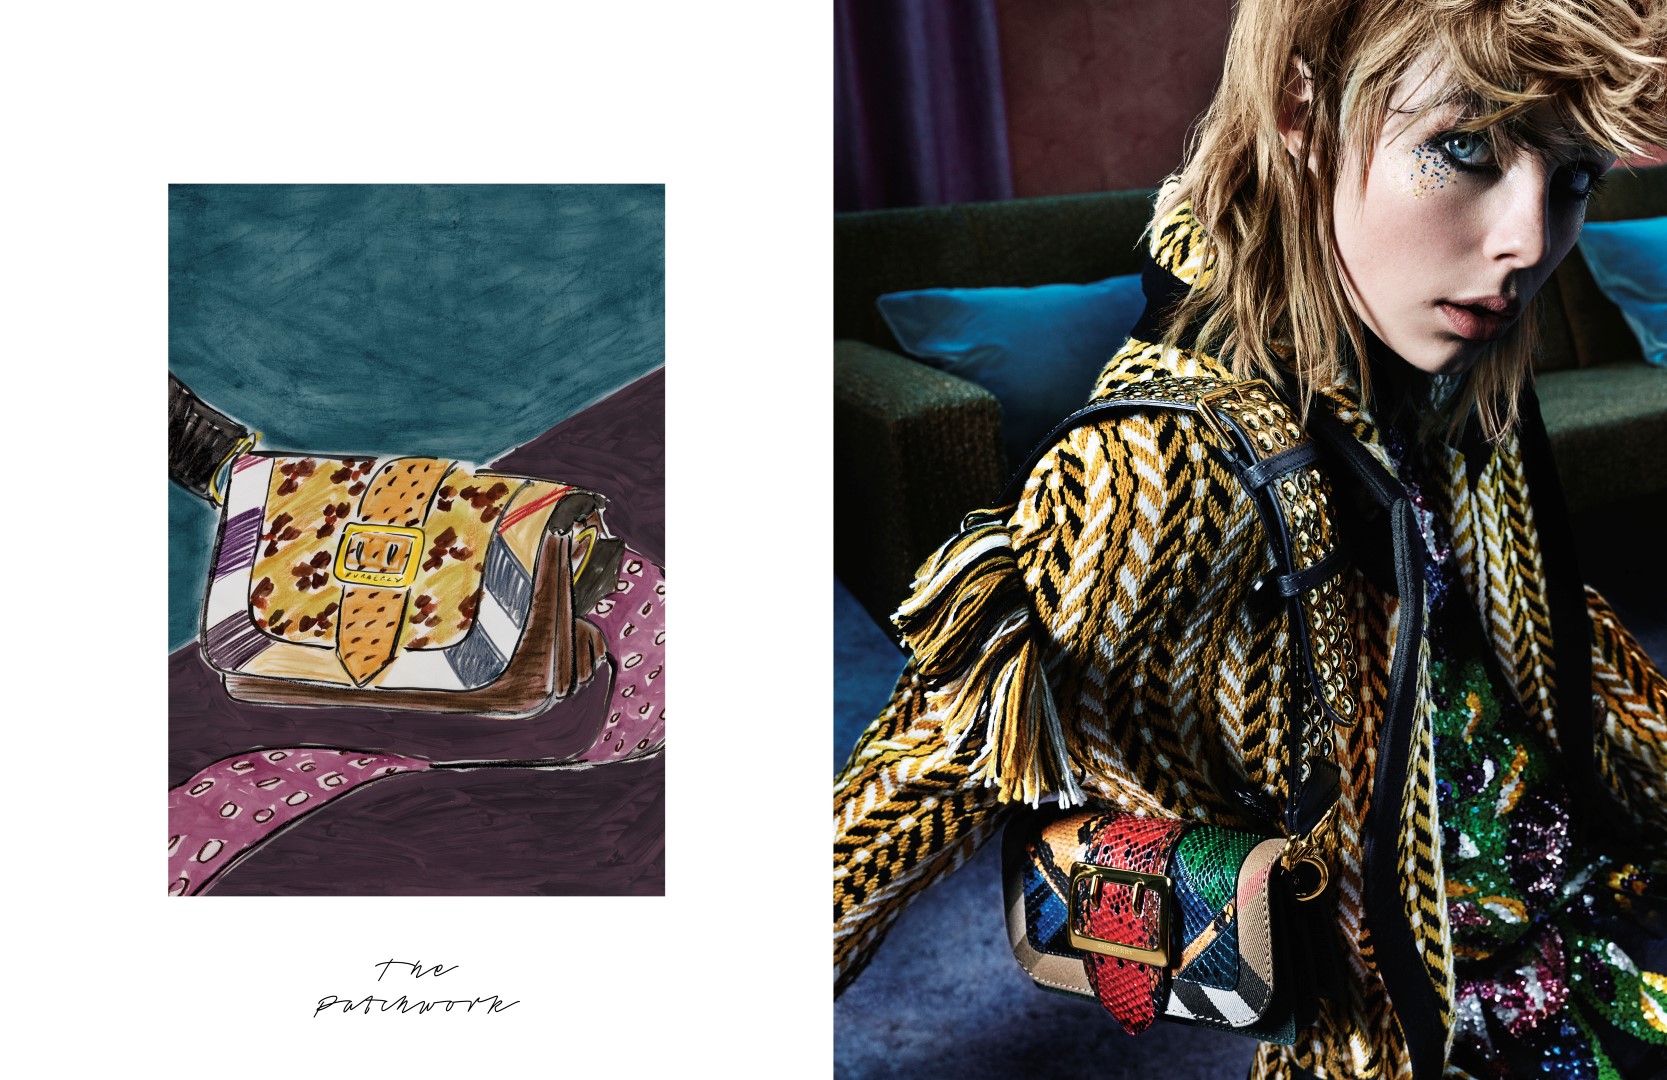 Burberry campagna A Patchwork, le foto